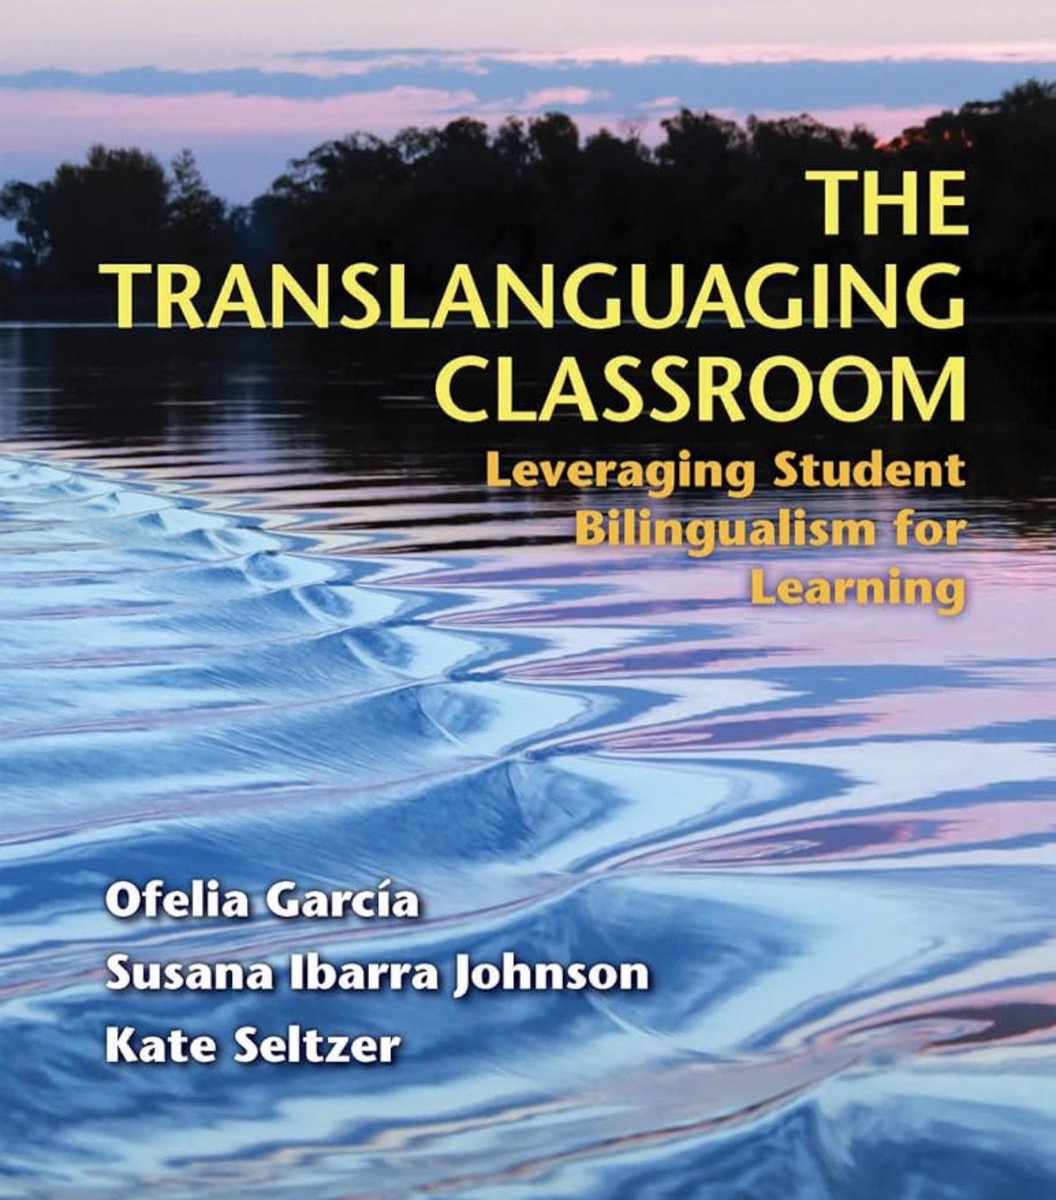 Some news: we are writing a 2nd edition of THE TRANSLANGUAGING CLASSROOM! 🎉 We want to include some reader testimonials, so if you’ve used the book, please tell us about it via this short form: tinyurl.com/4fyy7kpw And please retweet/pass on to others too! Thank you!!